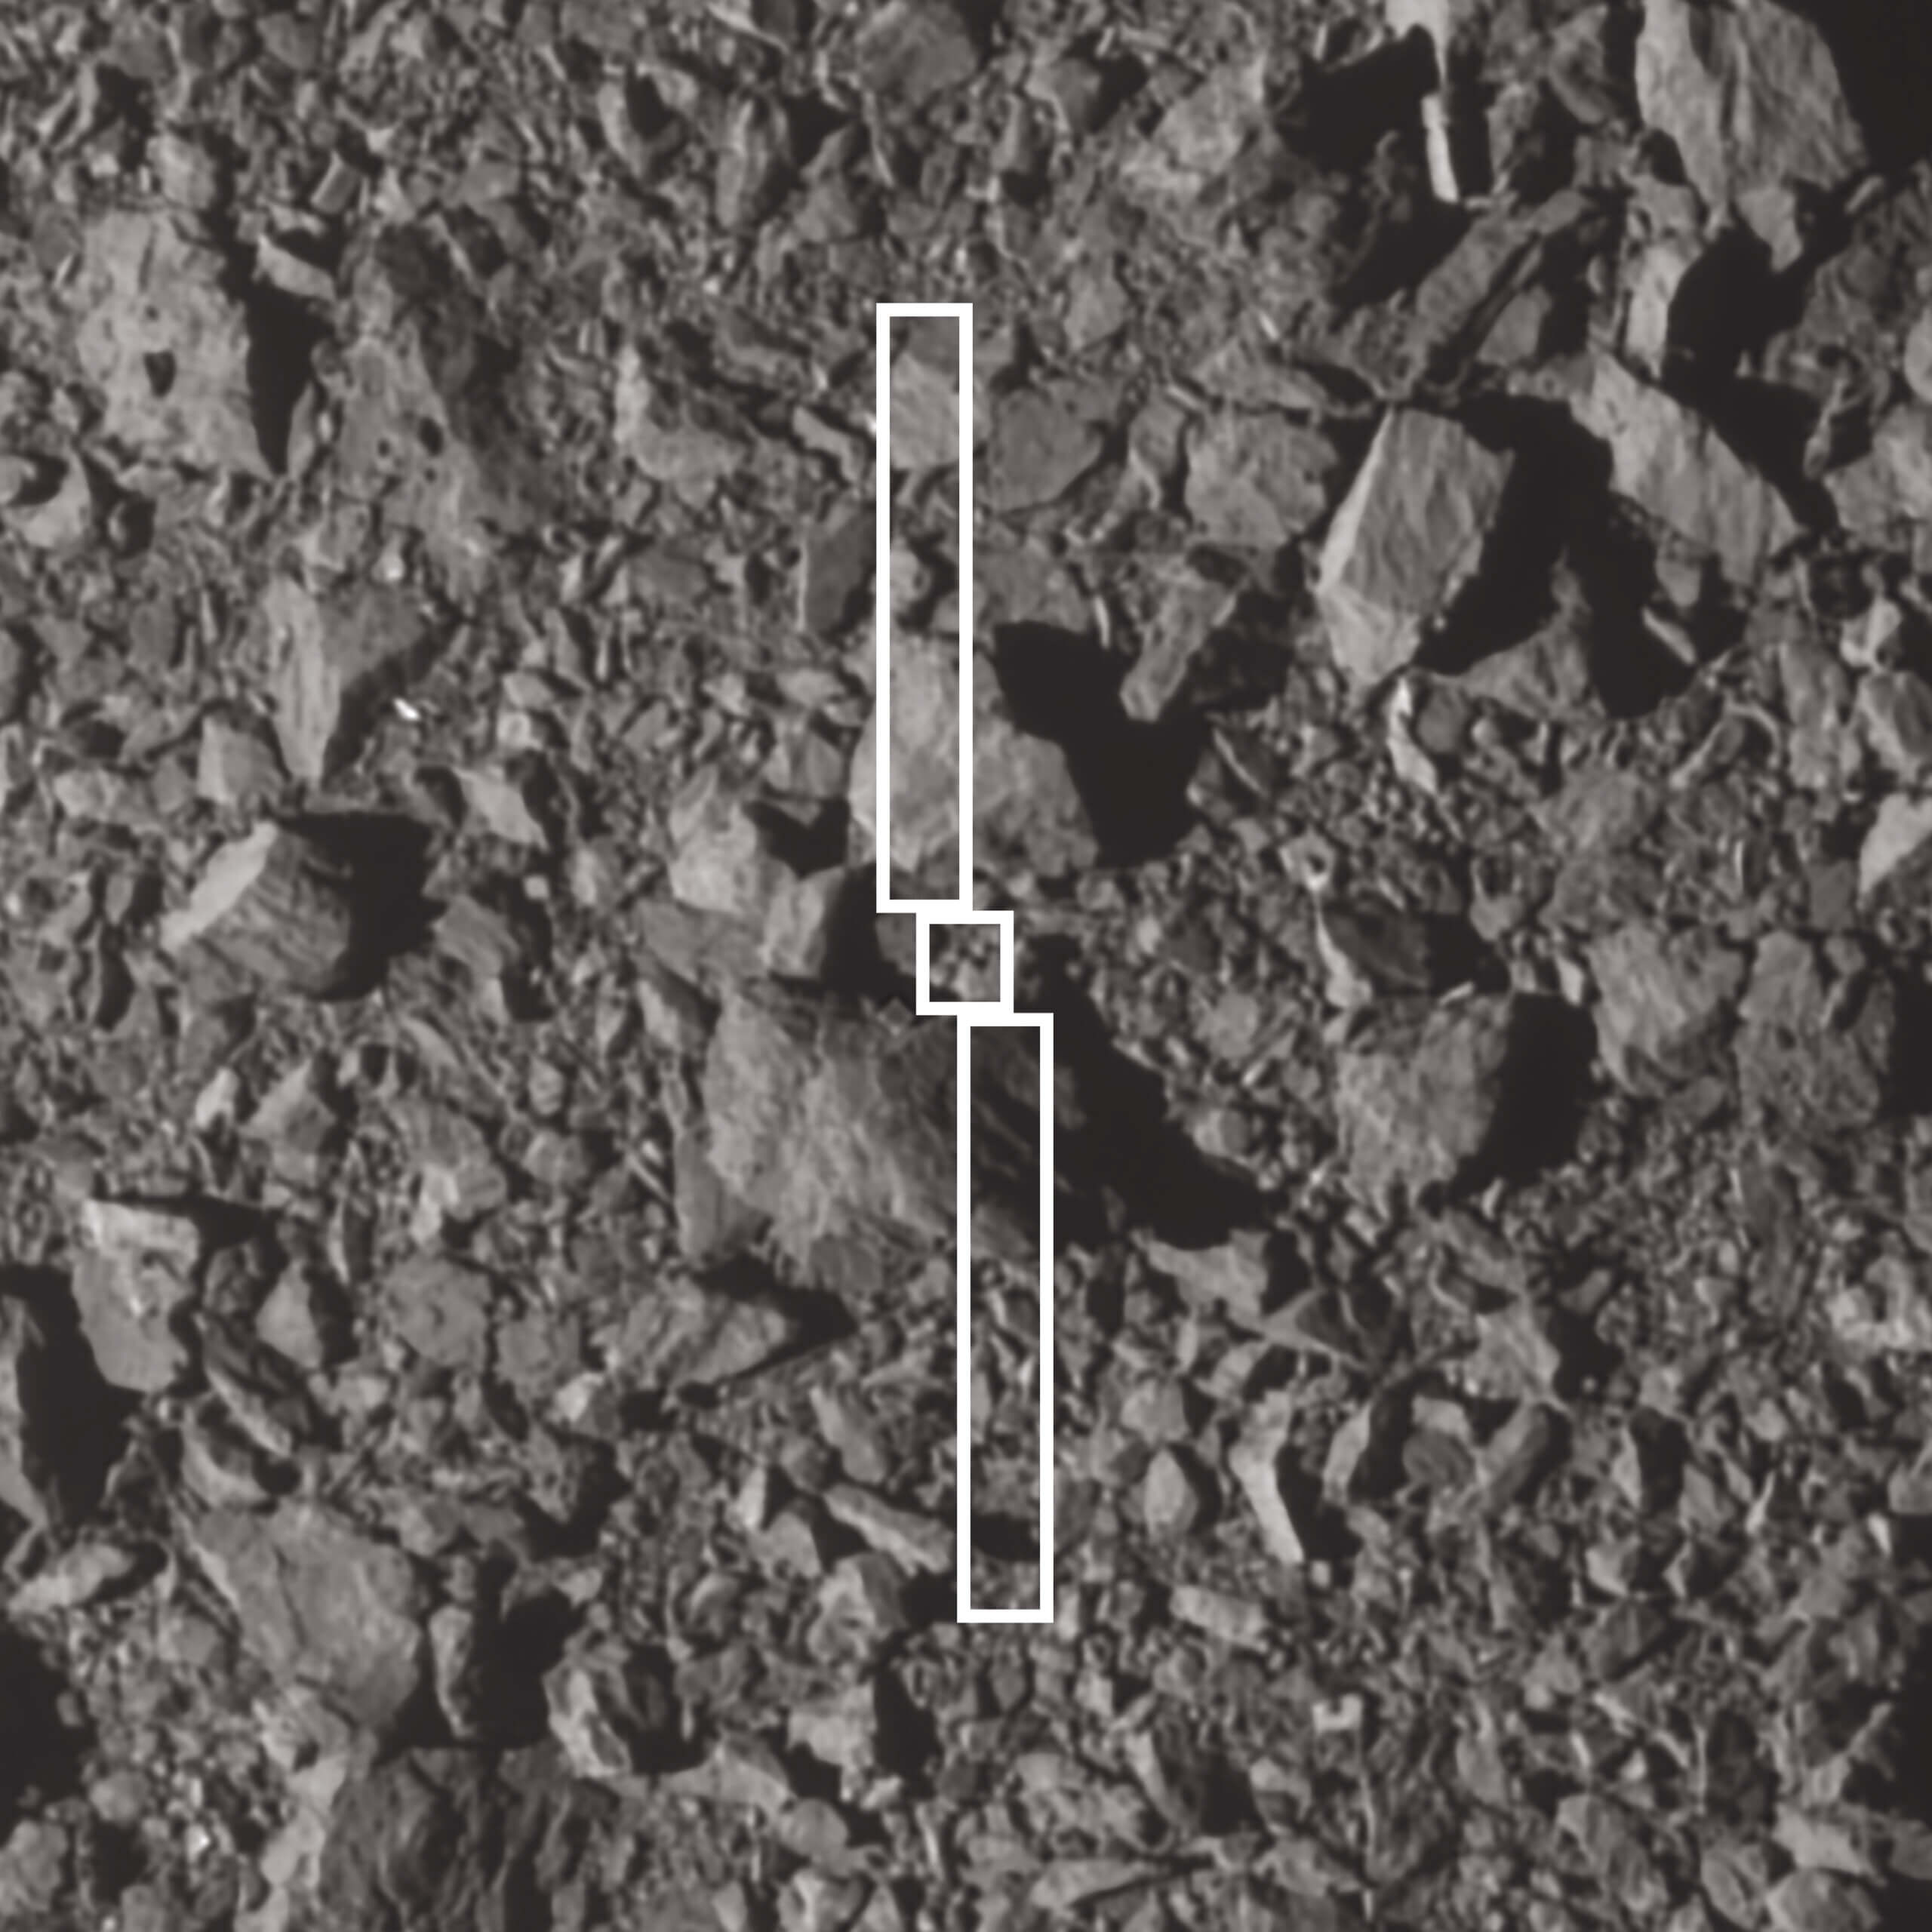 This image shows the footprint of the DART spacecraft and its two long solar panels above the point where it collided with a dimorphous asteroid. The width of the larger rock near the impact site is about 6.5 meters. DART took the photo three seconds before impact. Credit: NASA/Johns Hopkins APL